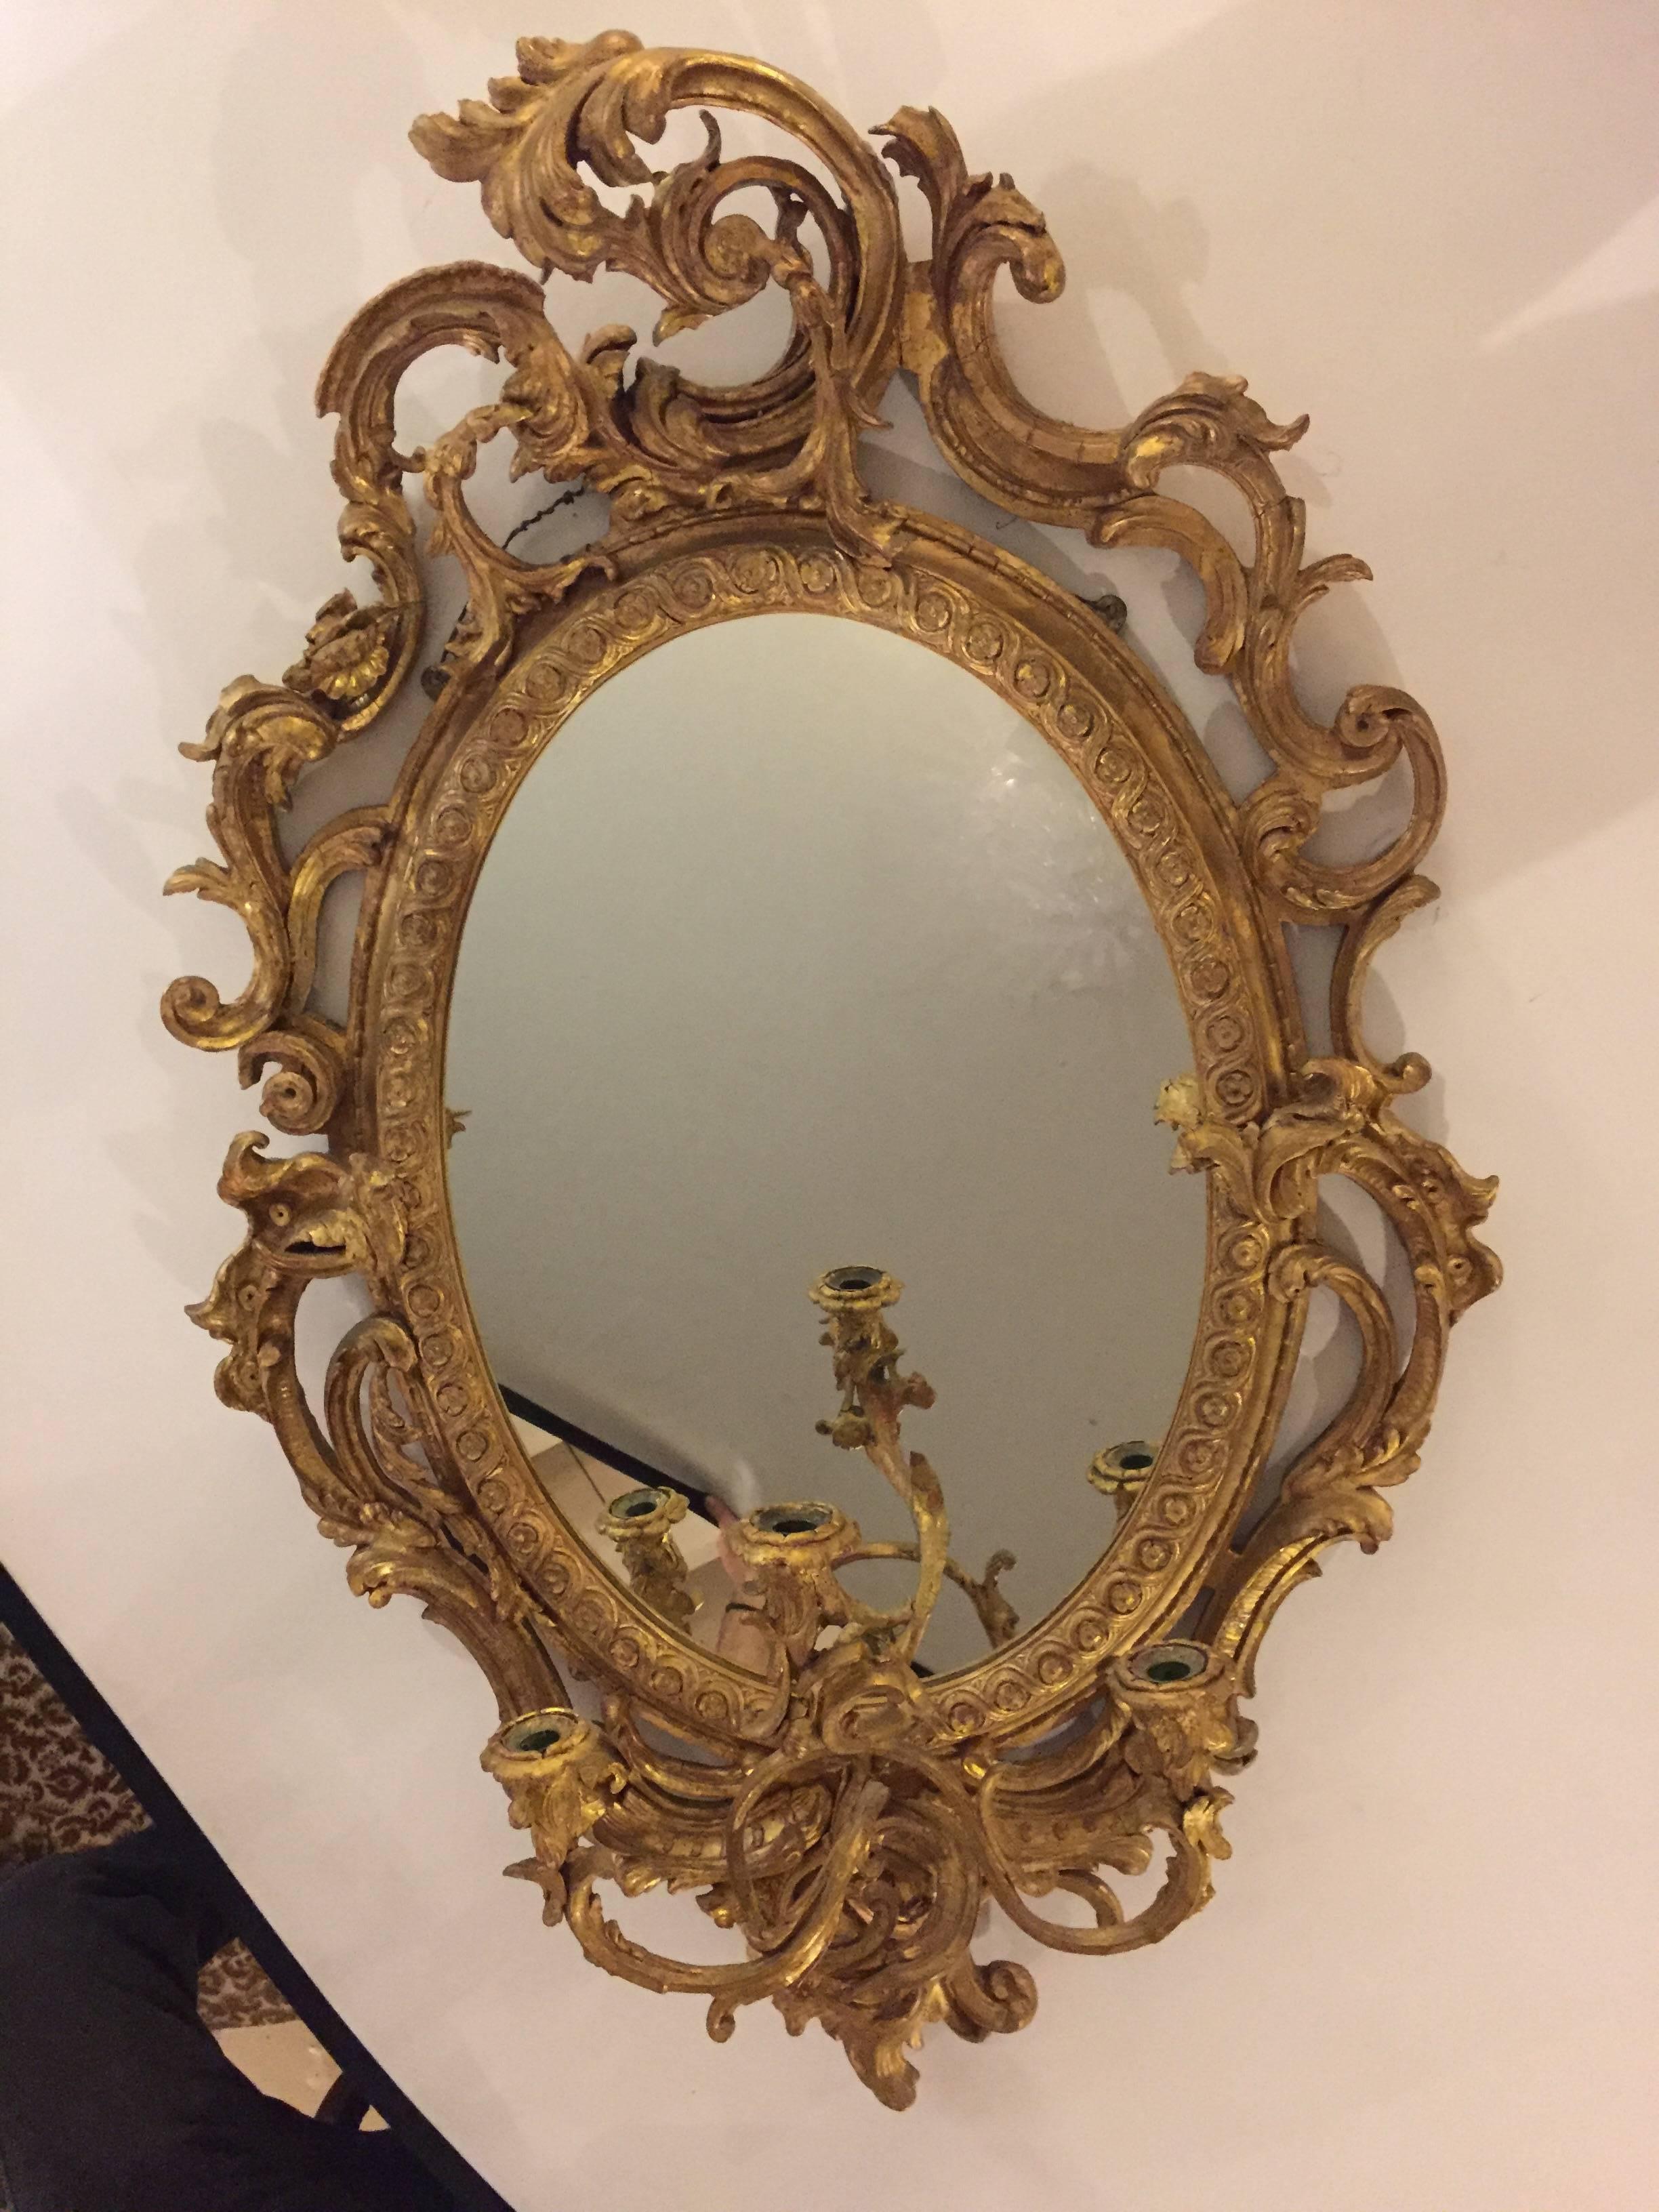 19th century pair of gilt and gesso wall mirror having three-arm sconce. This is a simply stunning pair of three-arm sconces with mirror backs and wonderfully carved wood and gesso frames. The centre oval mirror of clear and clean form having an